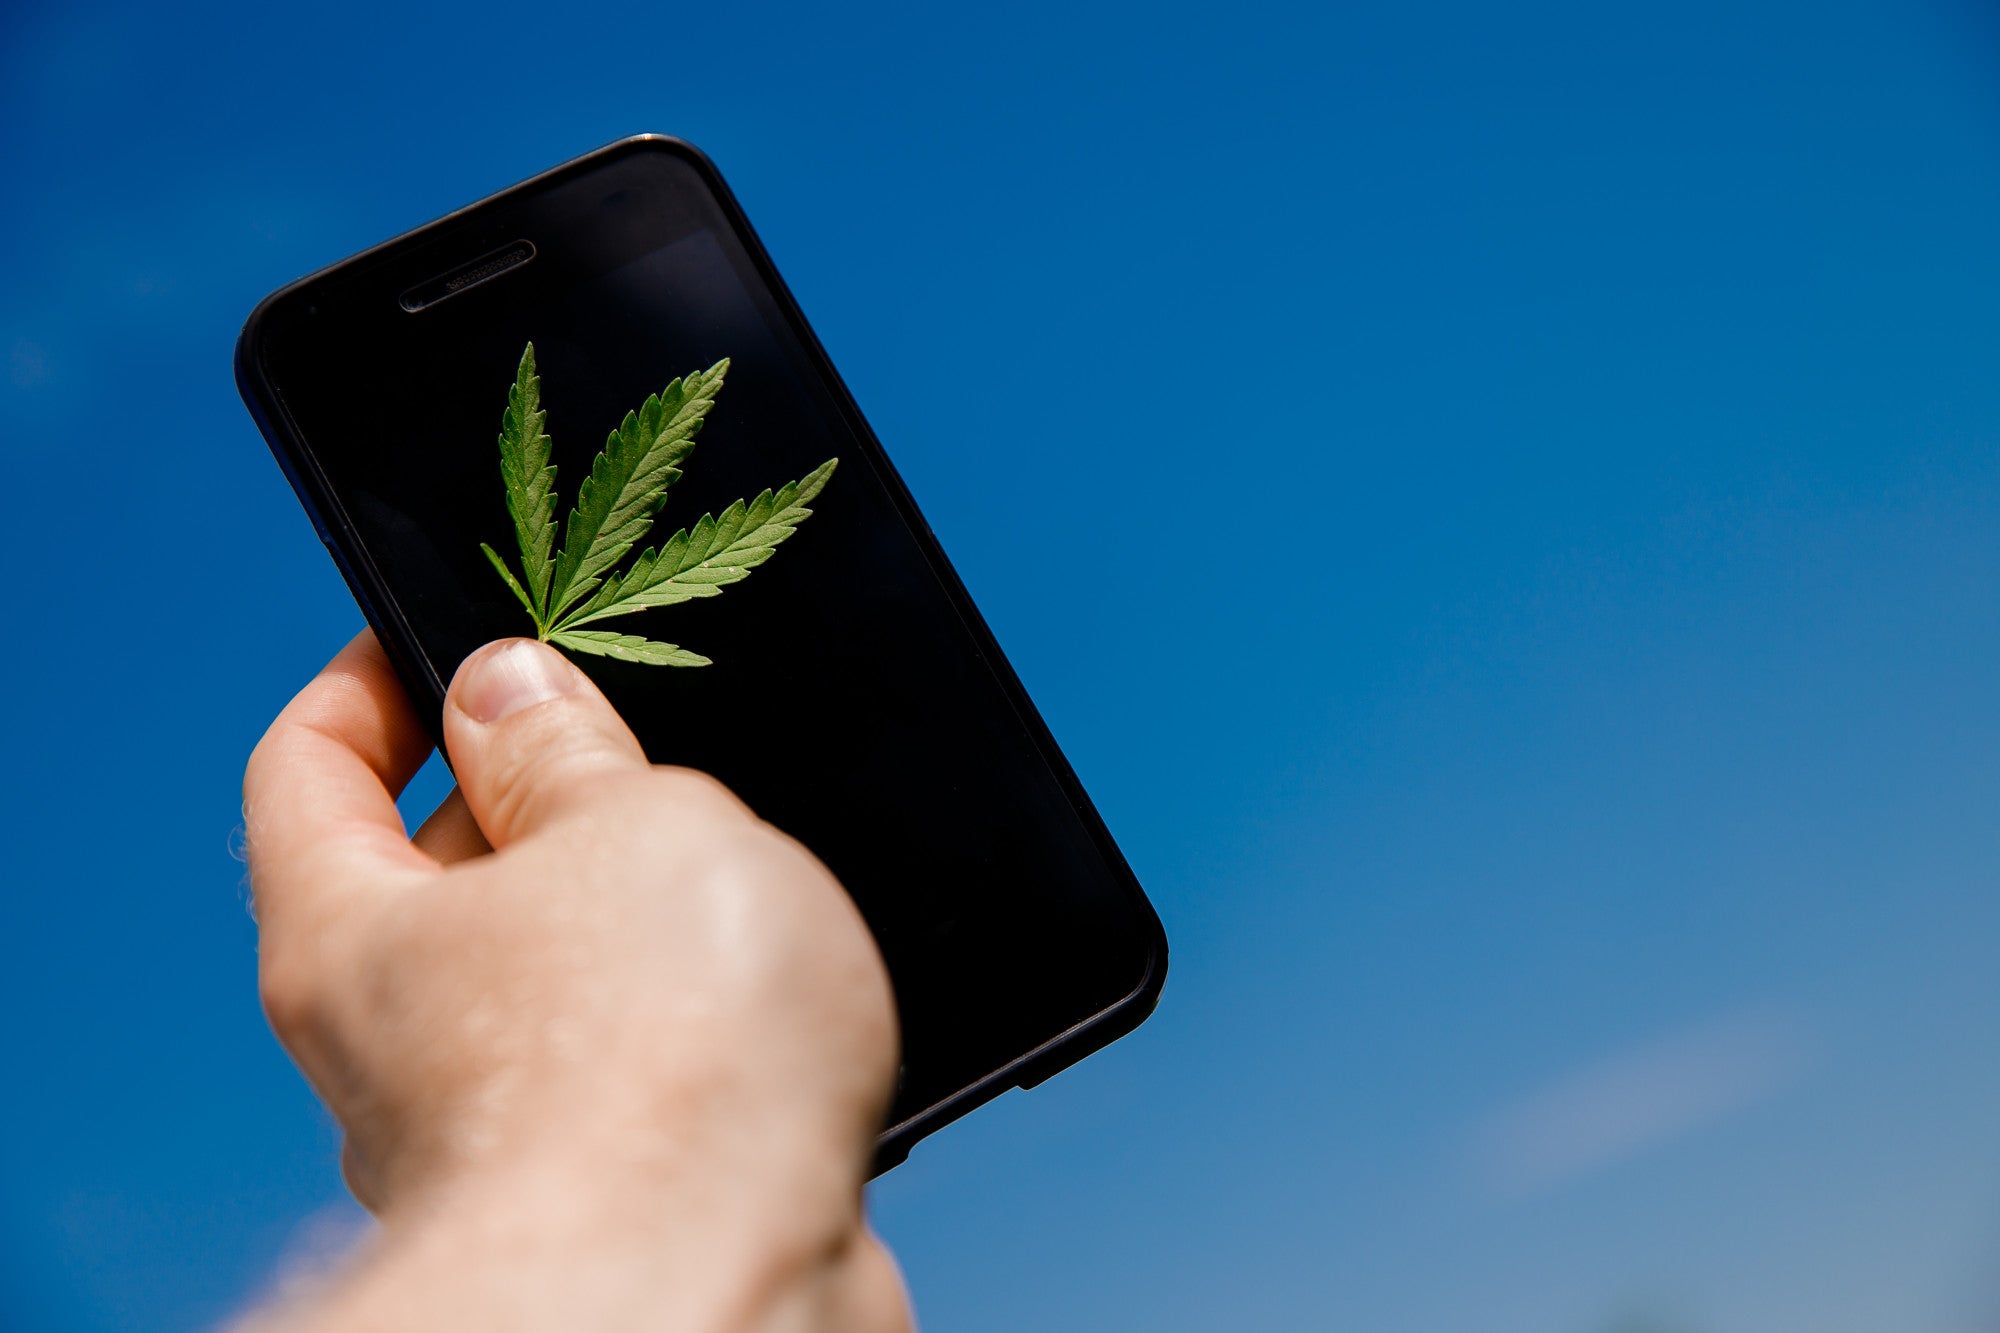 5 Tips on Safely Buying Cannabis Online for New Users